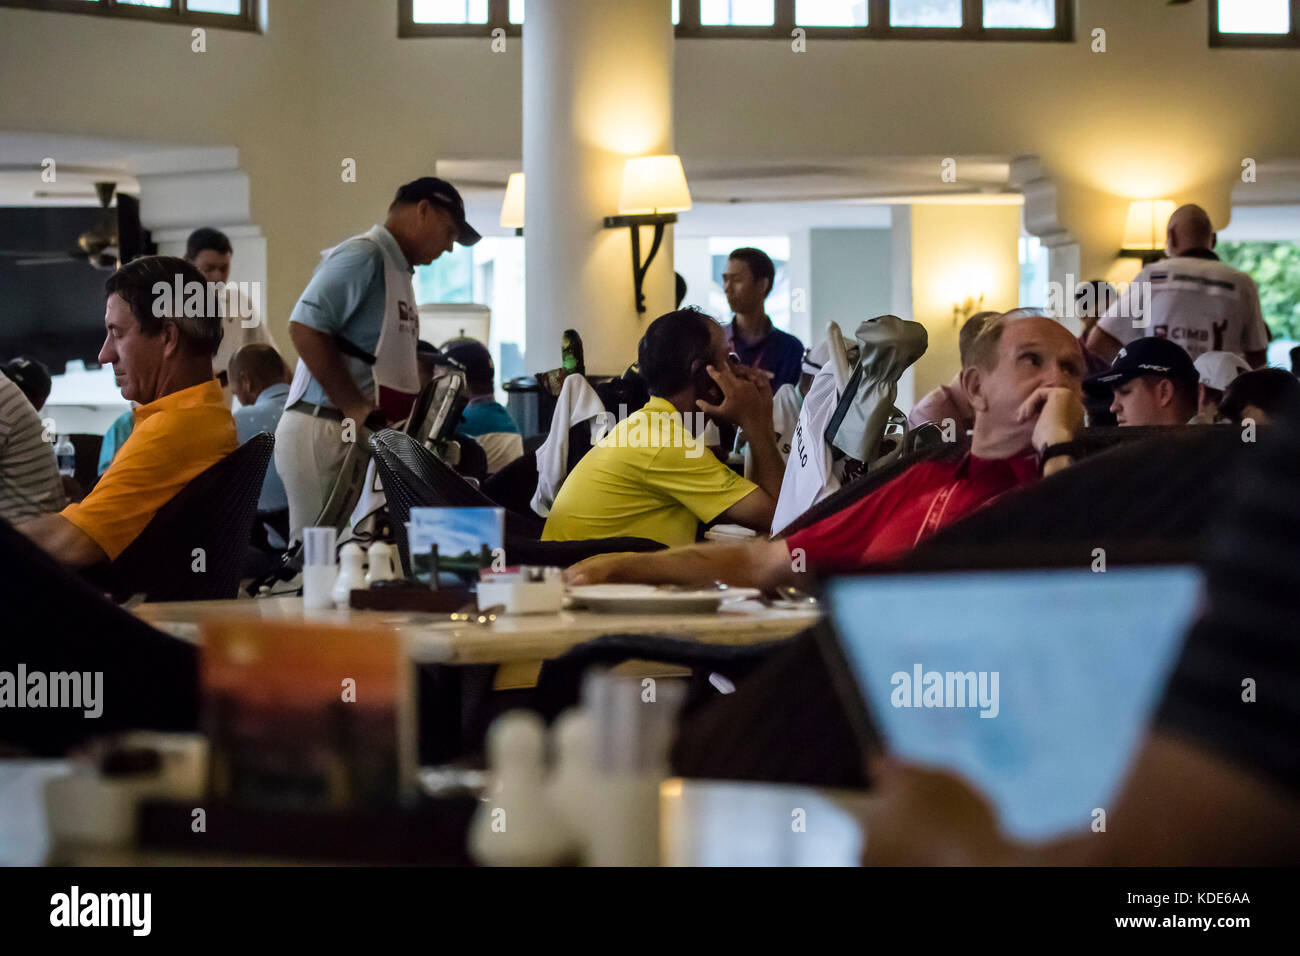 Kuala Lumpur, Malaysia. 13th October, 2017. PGA official suspend play as rain and thunder over shadow Round Two play at PGA CIMB Classic 2017 golf tournament in Kuala Lumpur, Malaysia. Players and caddies wait out the rain in the club cafe. © Danny Chan/Alamy Live News. Stock Photo